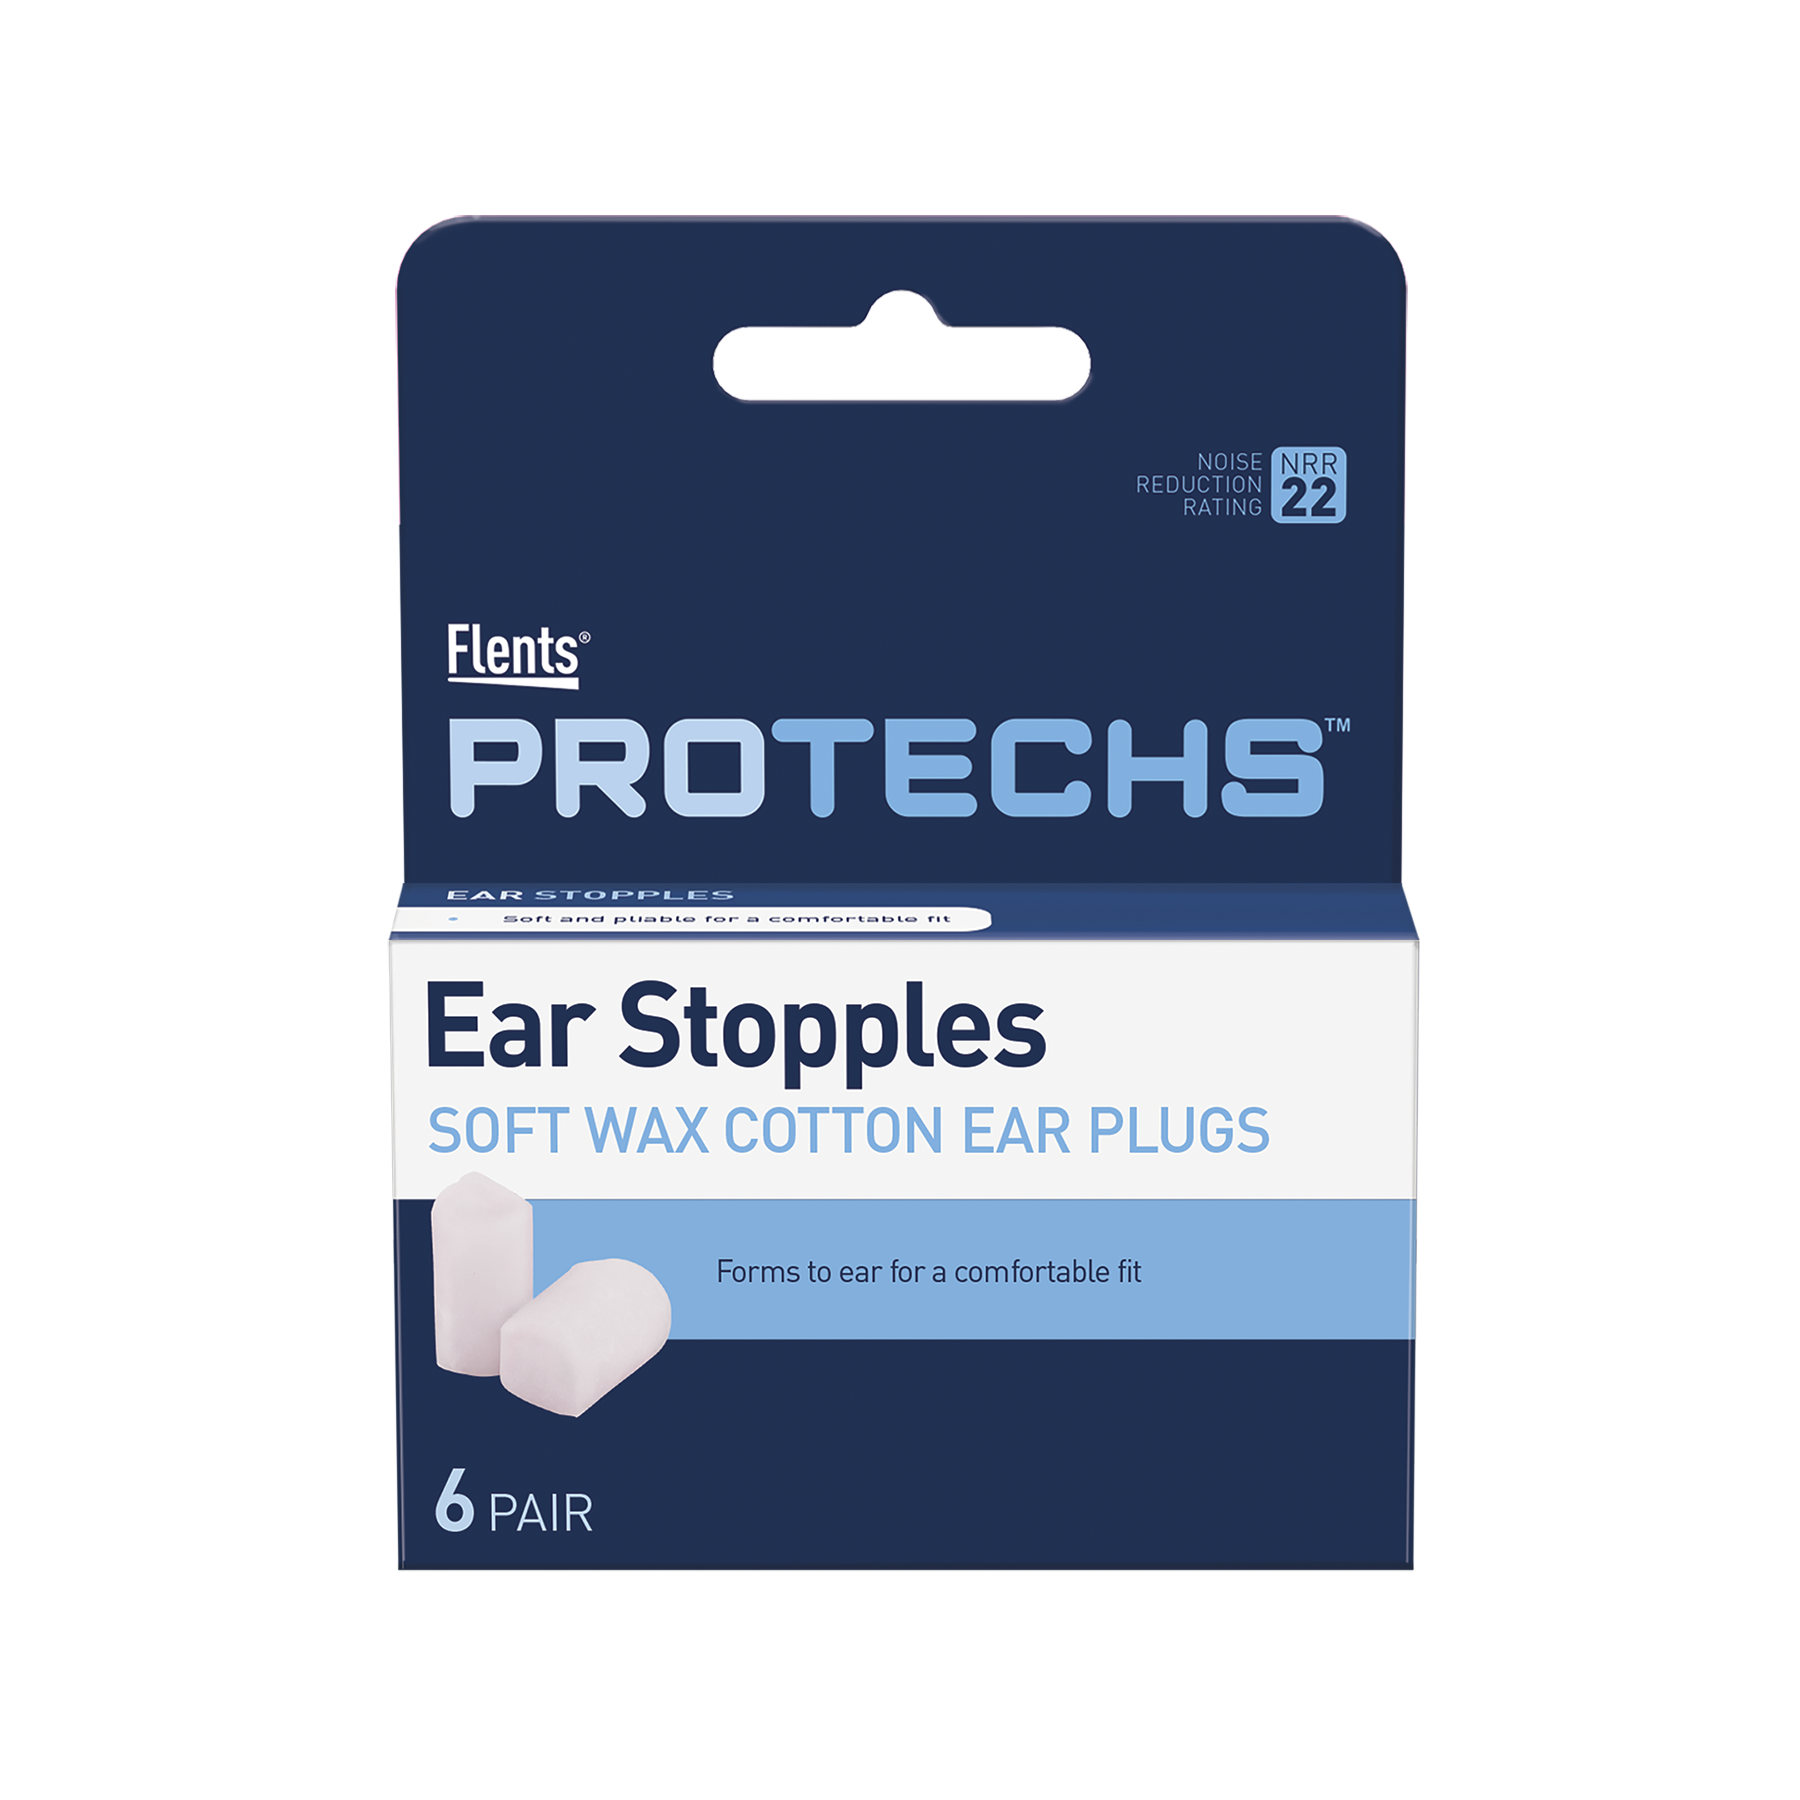 Flents Protechs Ear Stopples Soft Wax-Cotton Ear Plugs